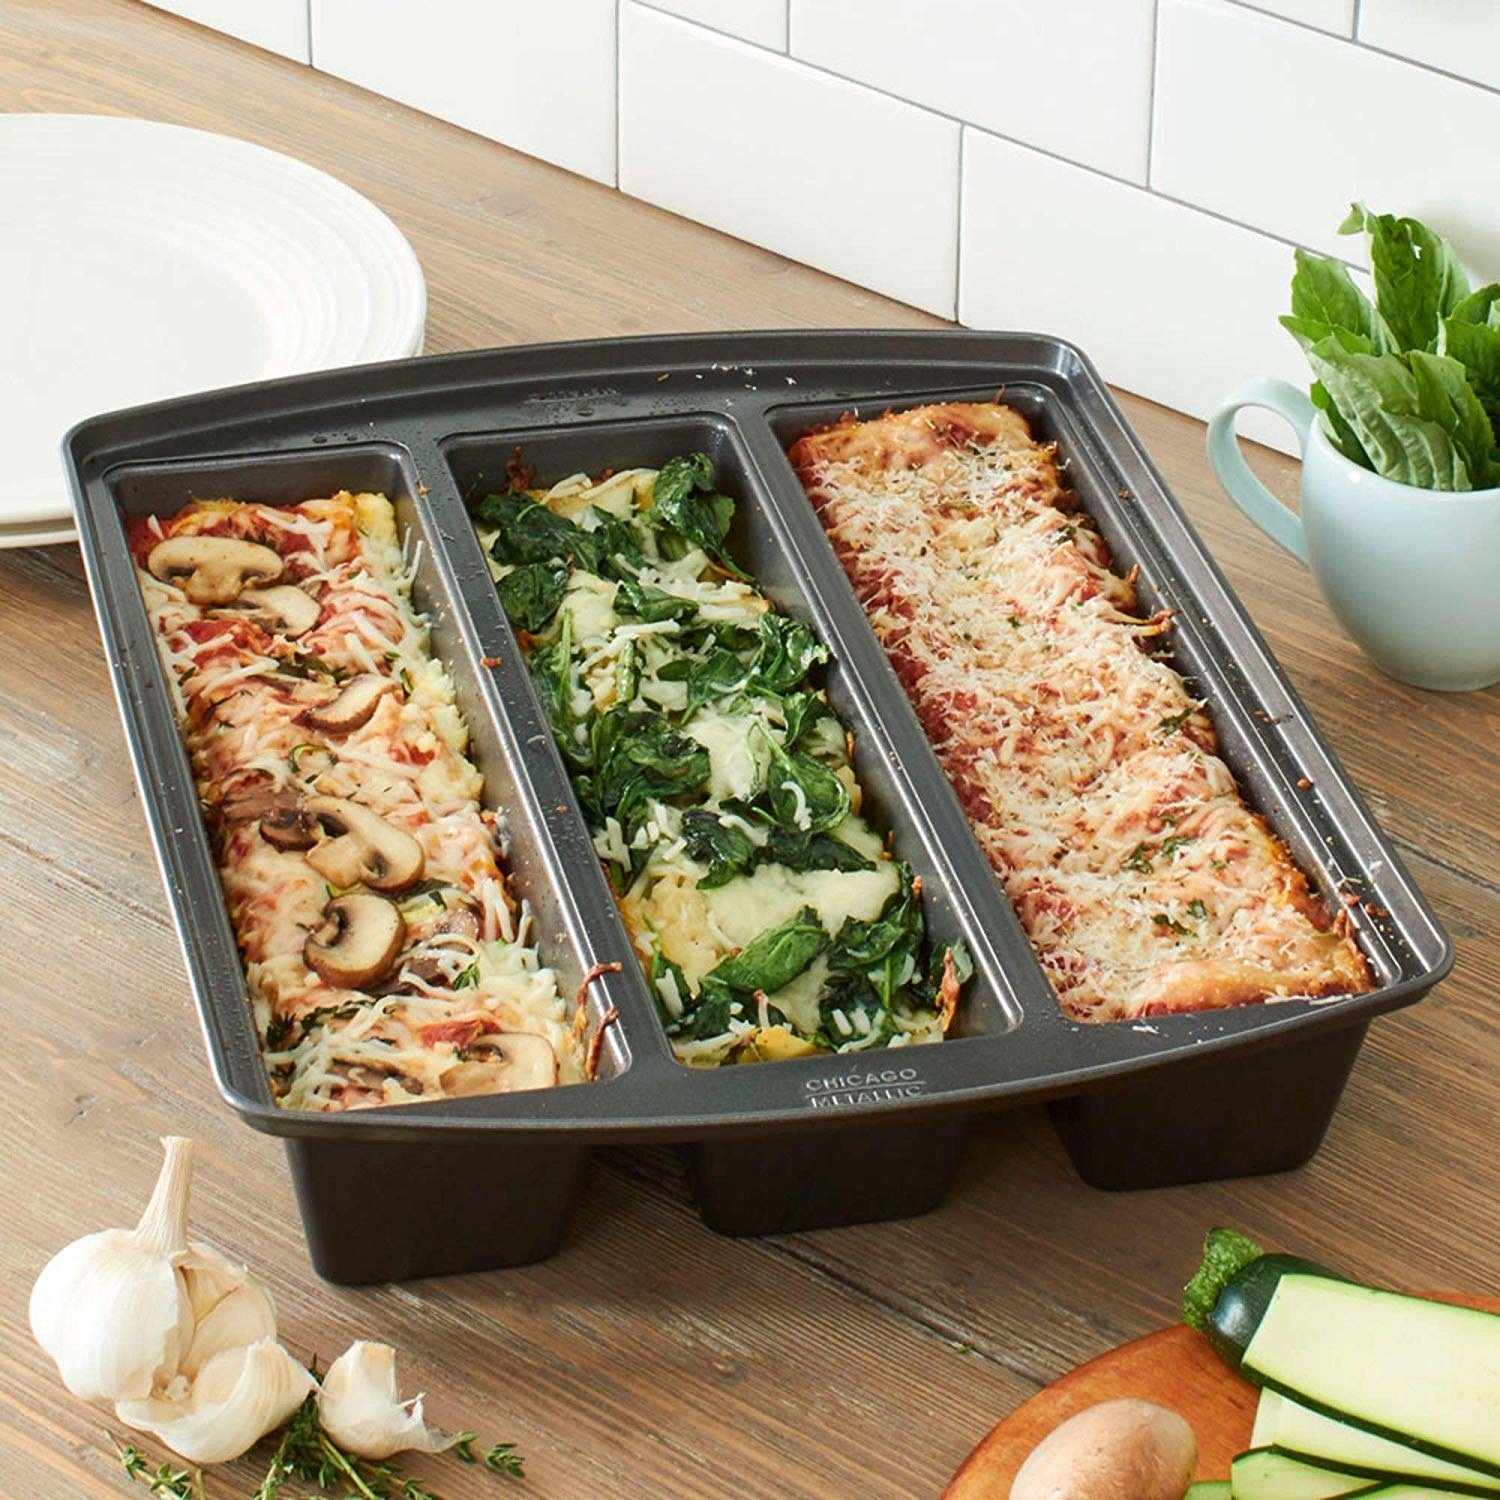 THe pan filled with three types of lasagne